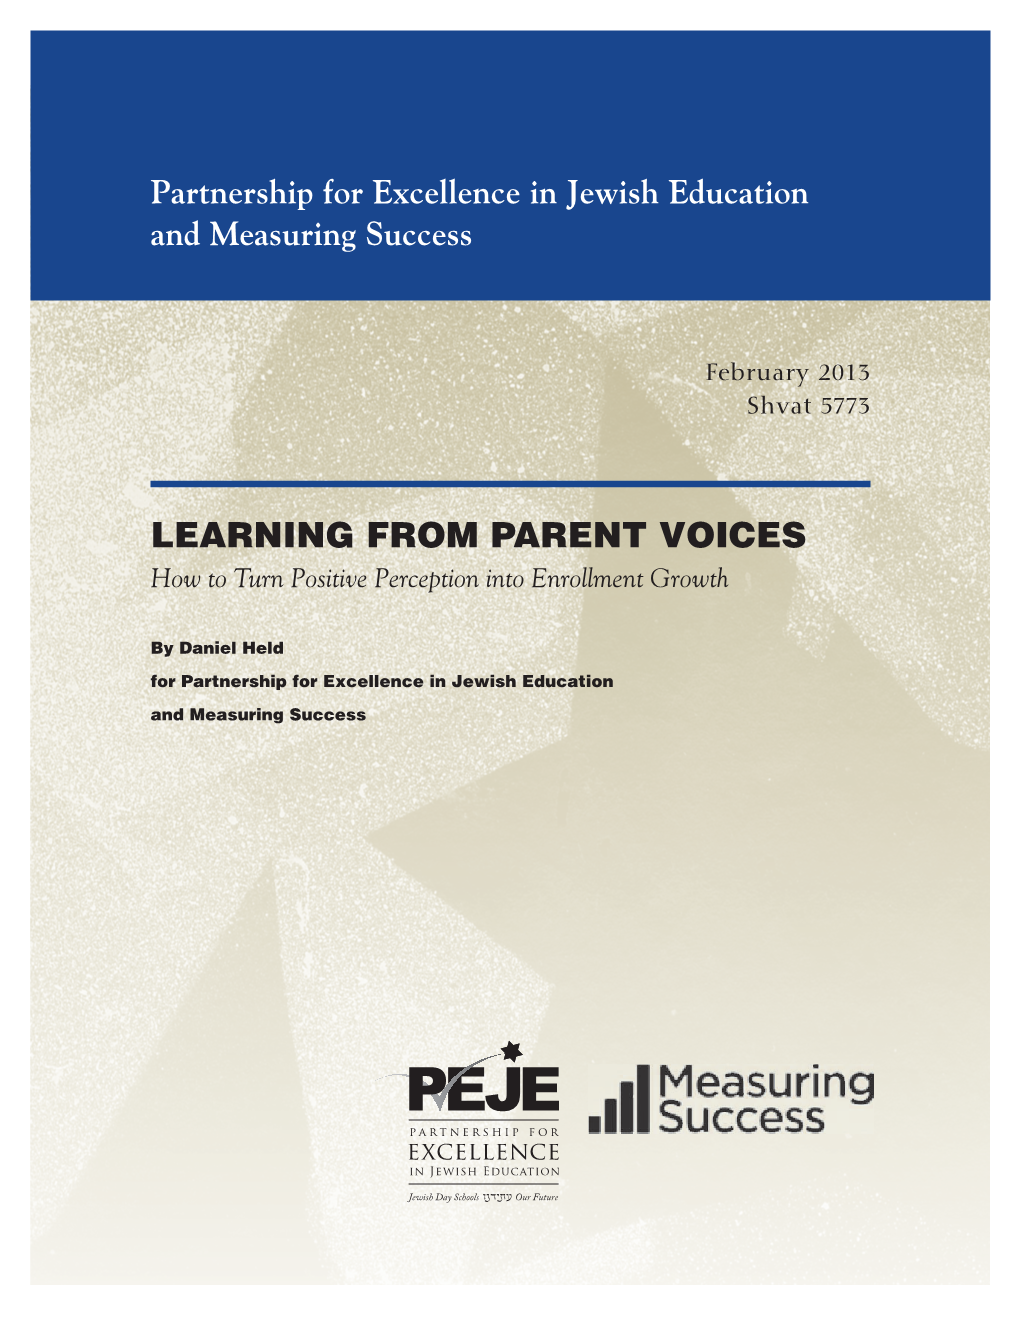 LEARNING from PARENT VOICES How to Turn Positive Perception Into Enrollment Growth